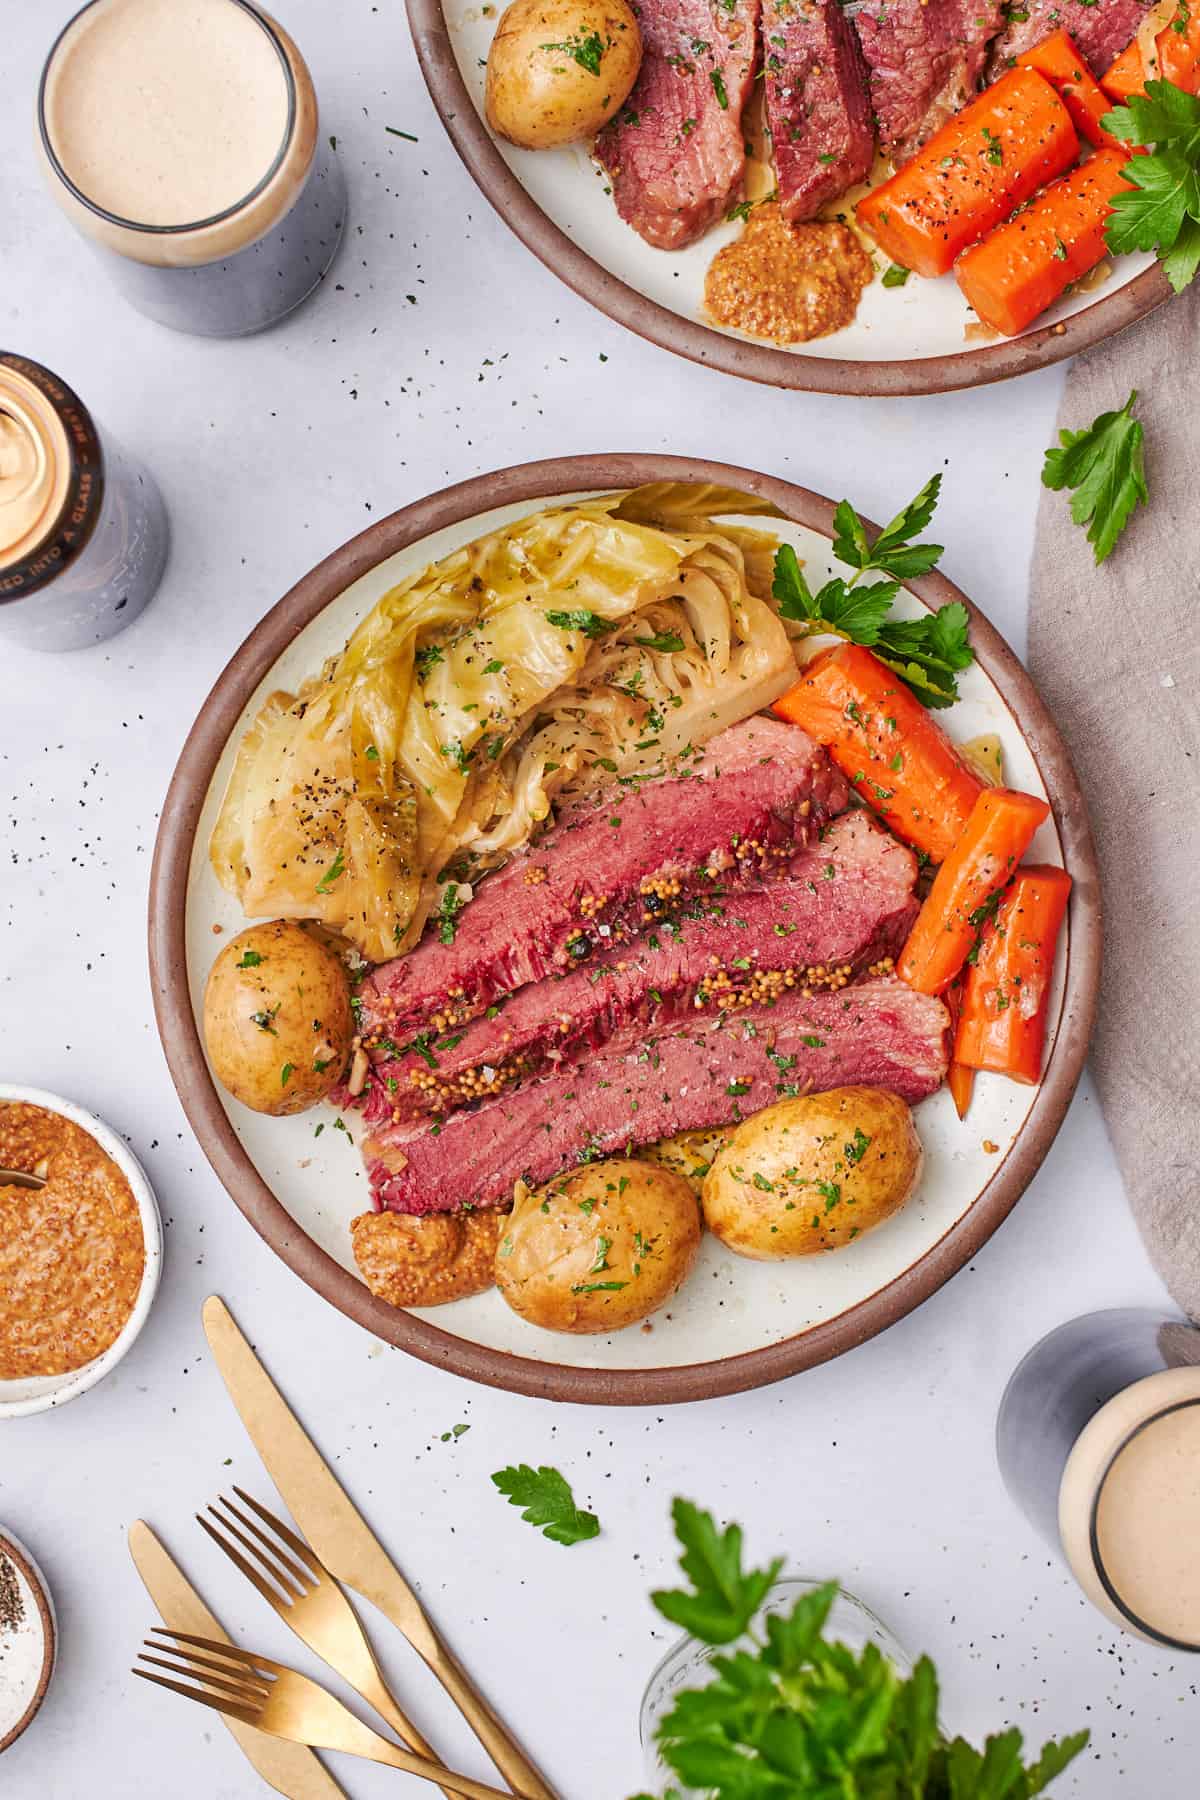 corned beef and cabbage on a plate with yellow potatoes, carrots, parsley, and stone ground mustard, with guinness on the table.